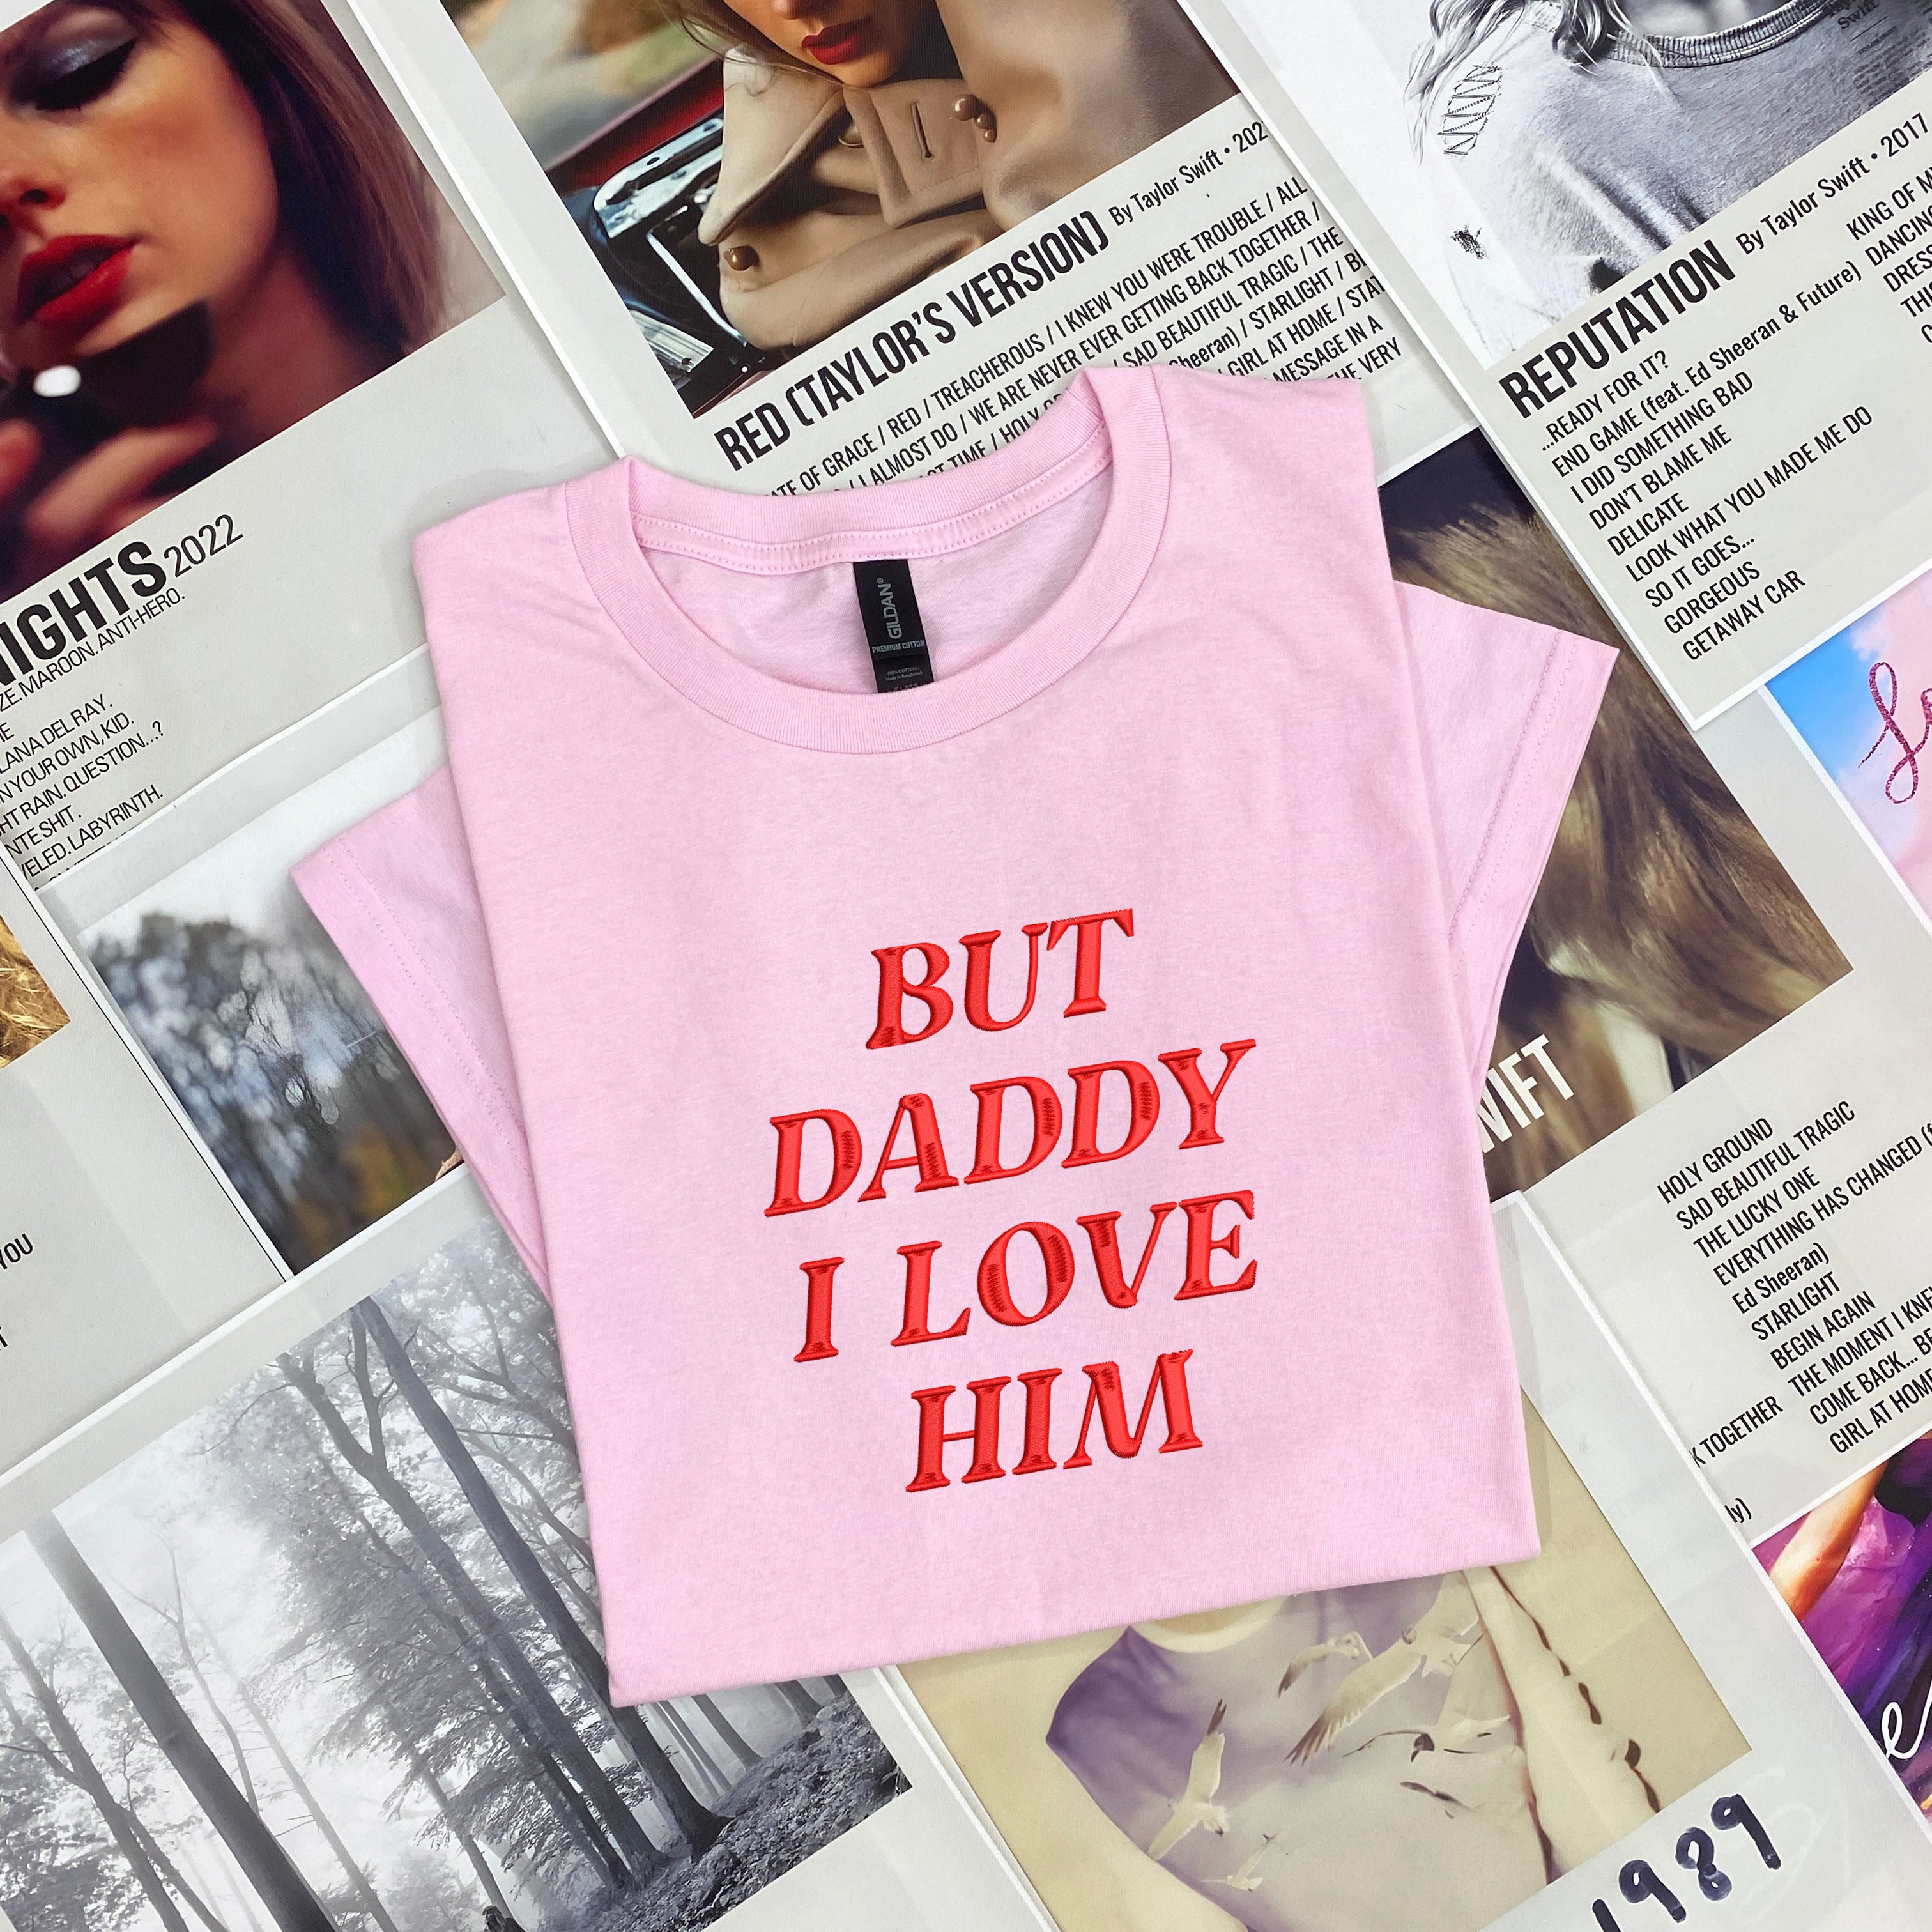 but daddy i love him embroidered shirt 1714190182410.jpg